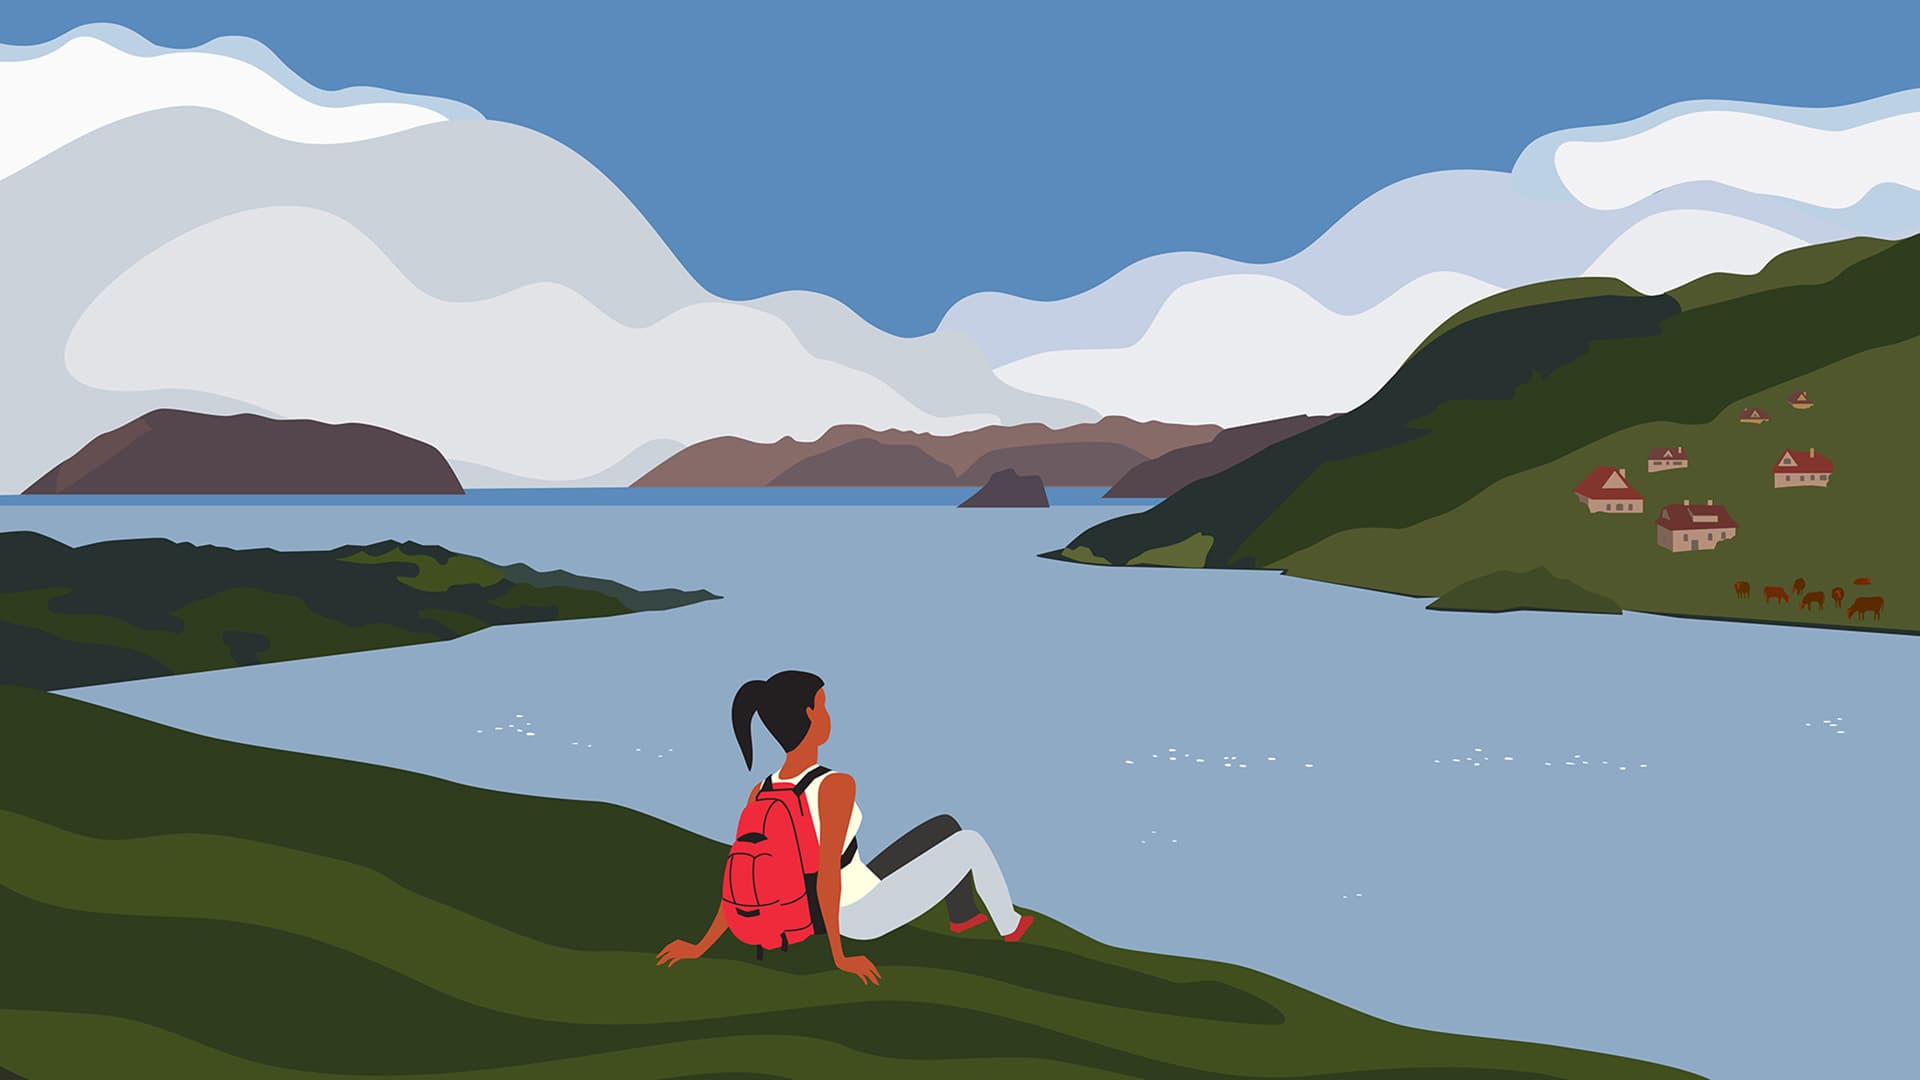 Illustration of person sitting alone near mountains and a body of water